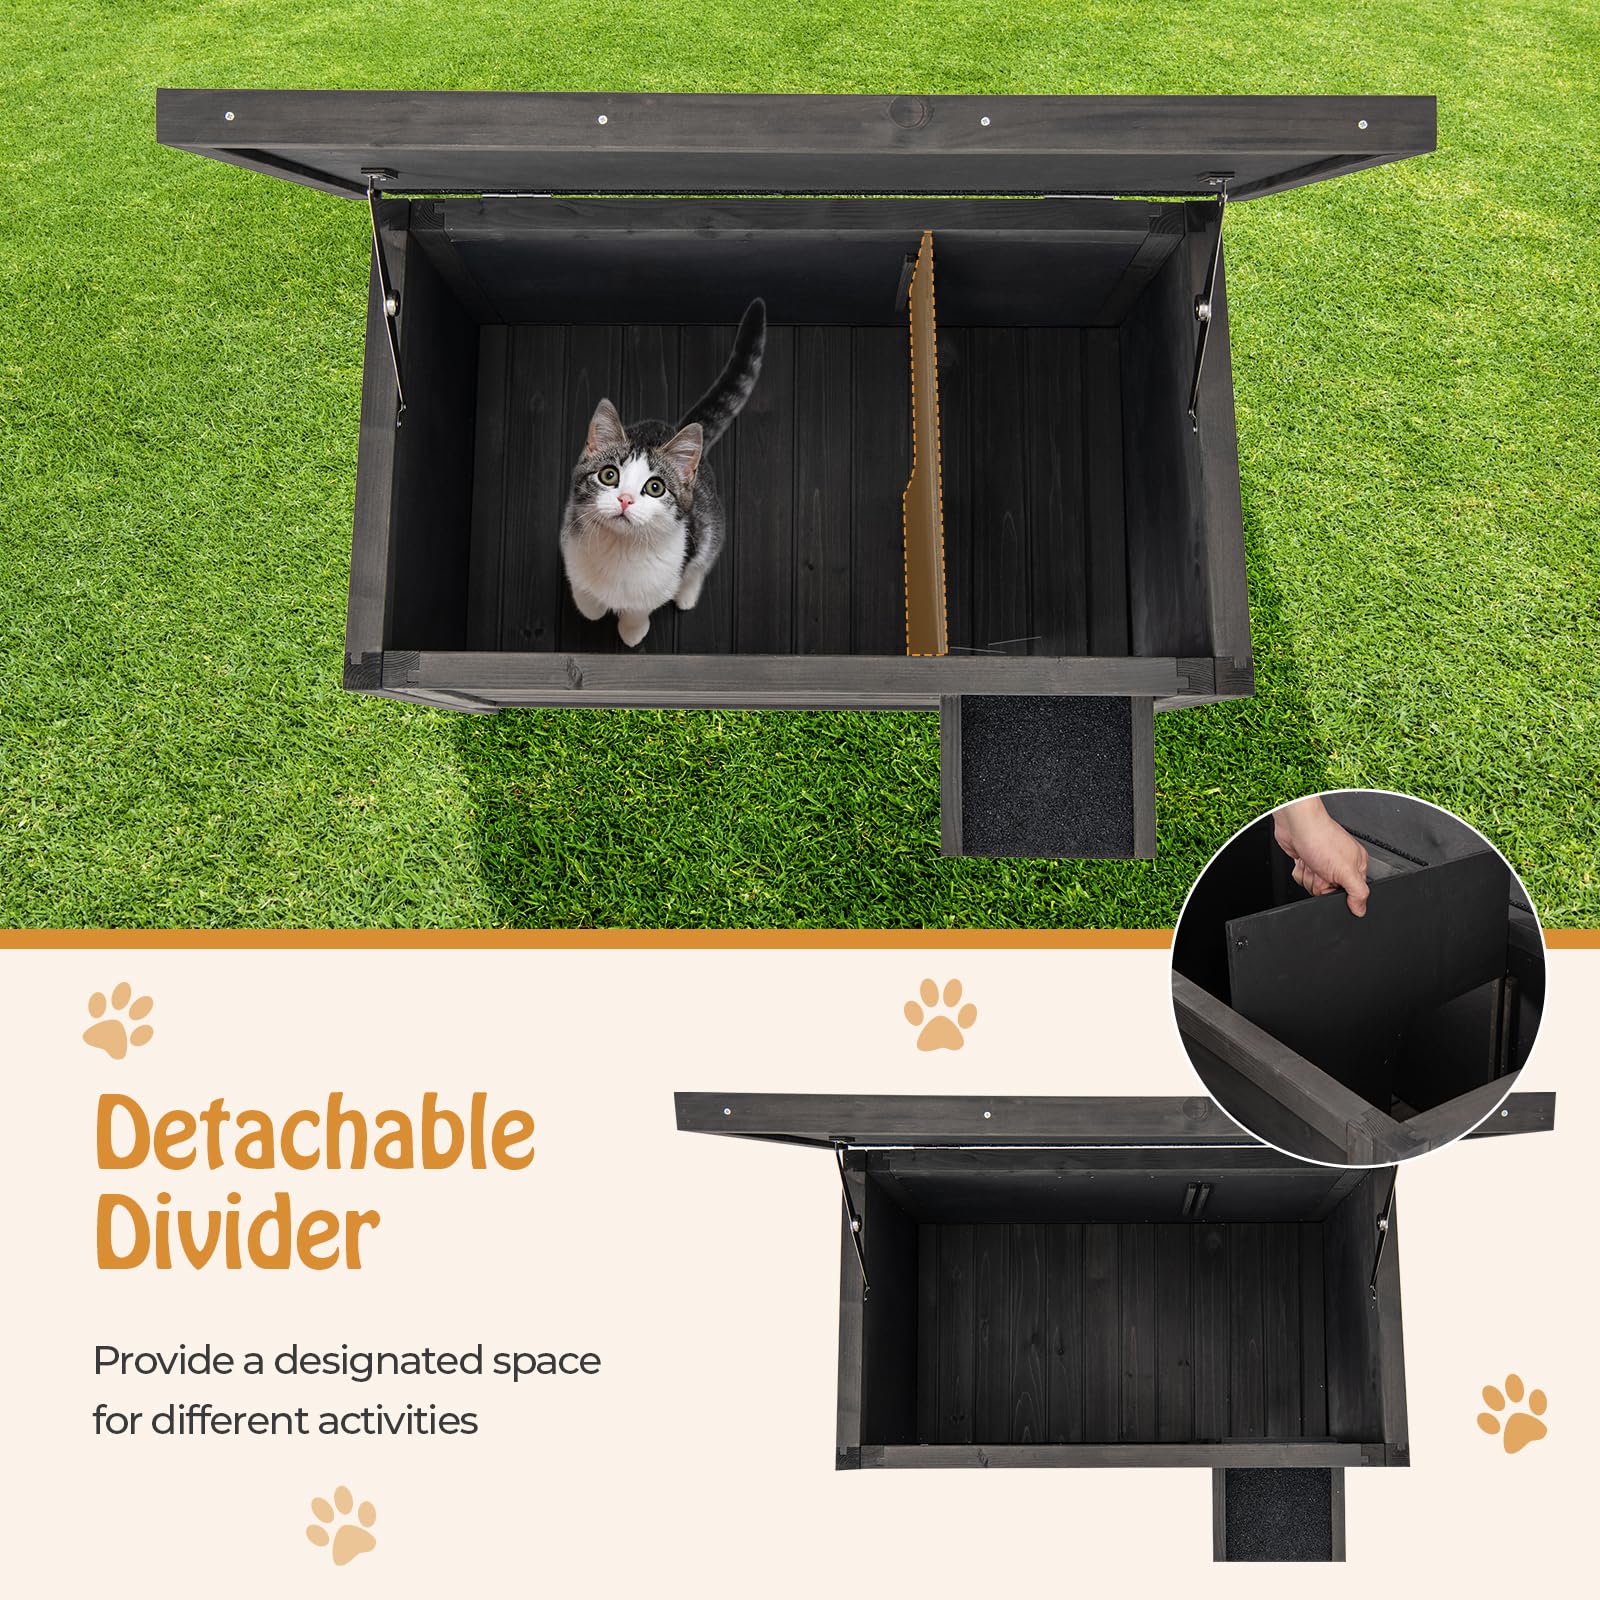 Giantex Outdoor Cat House - Weatherproof Feral Cat Shelter with All-Round Foam Insulated